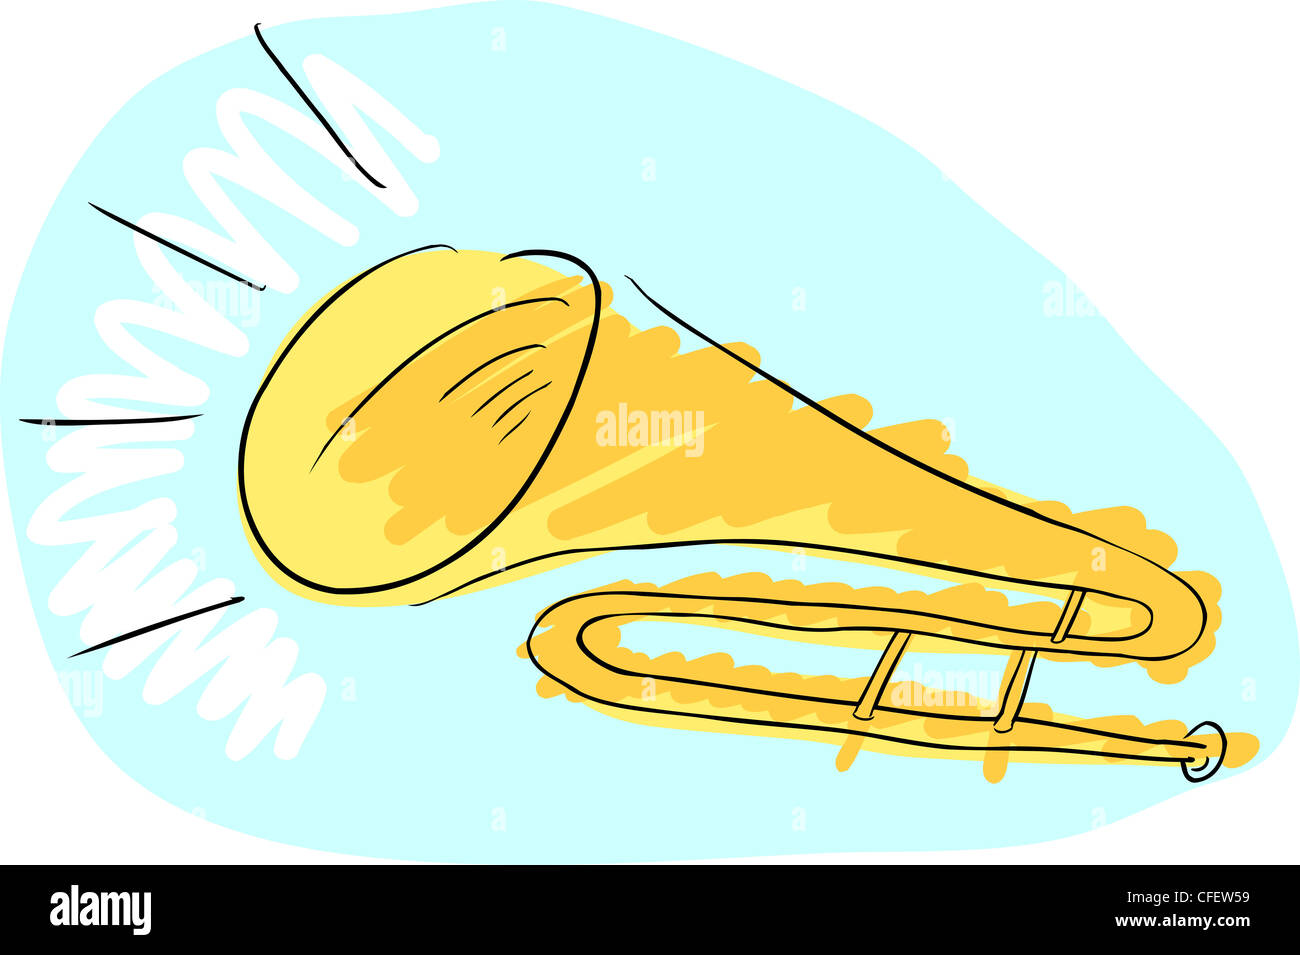 Doodle drawing of a trombone with sound coming from it Stock Photo - Alamy